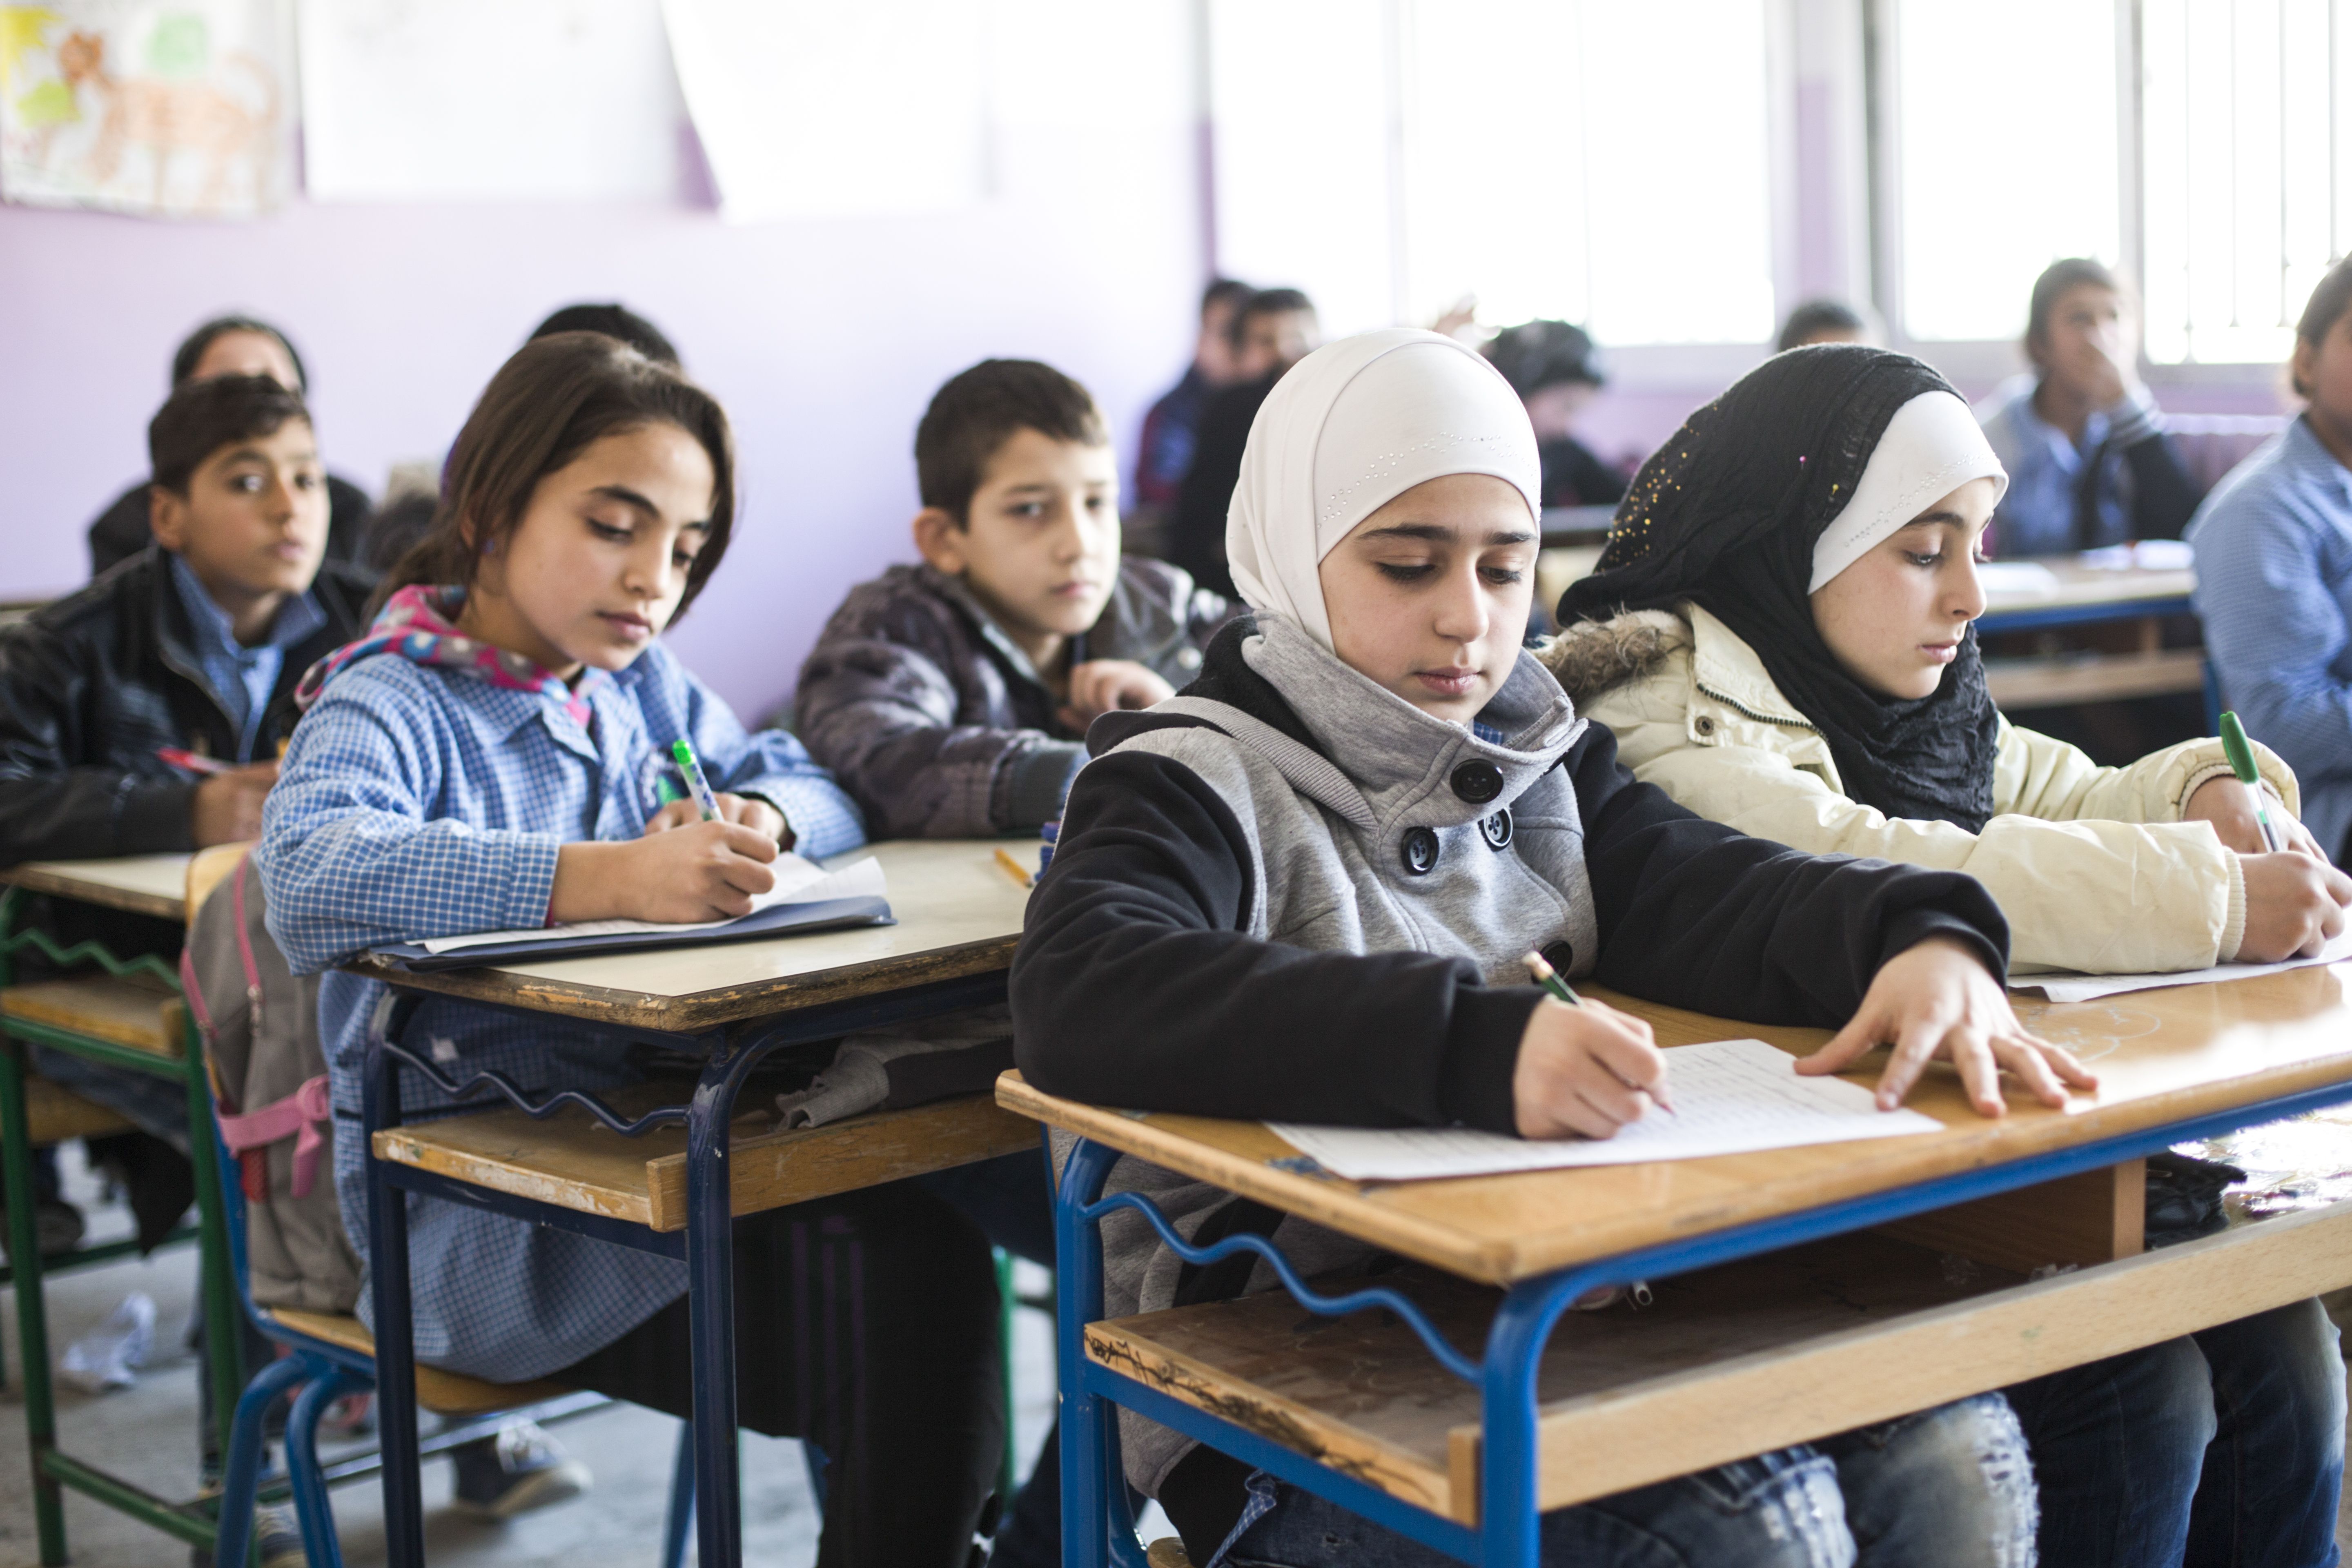 Many Syrian girls have been forced to stop their education because of conflict within the country.. Image courtesy DFID / CC BY 2.0. Lebanon, 2016.